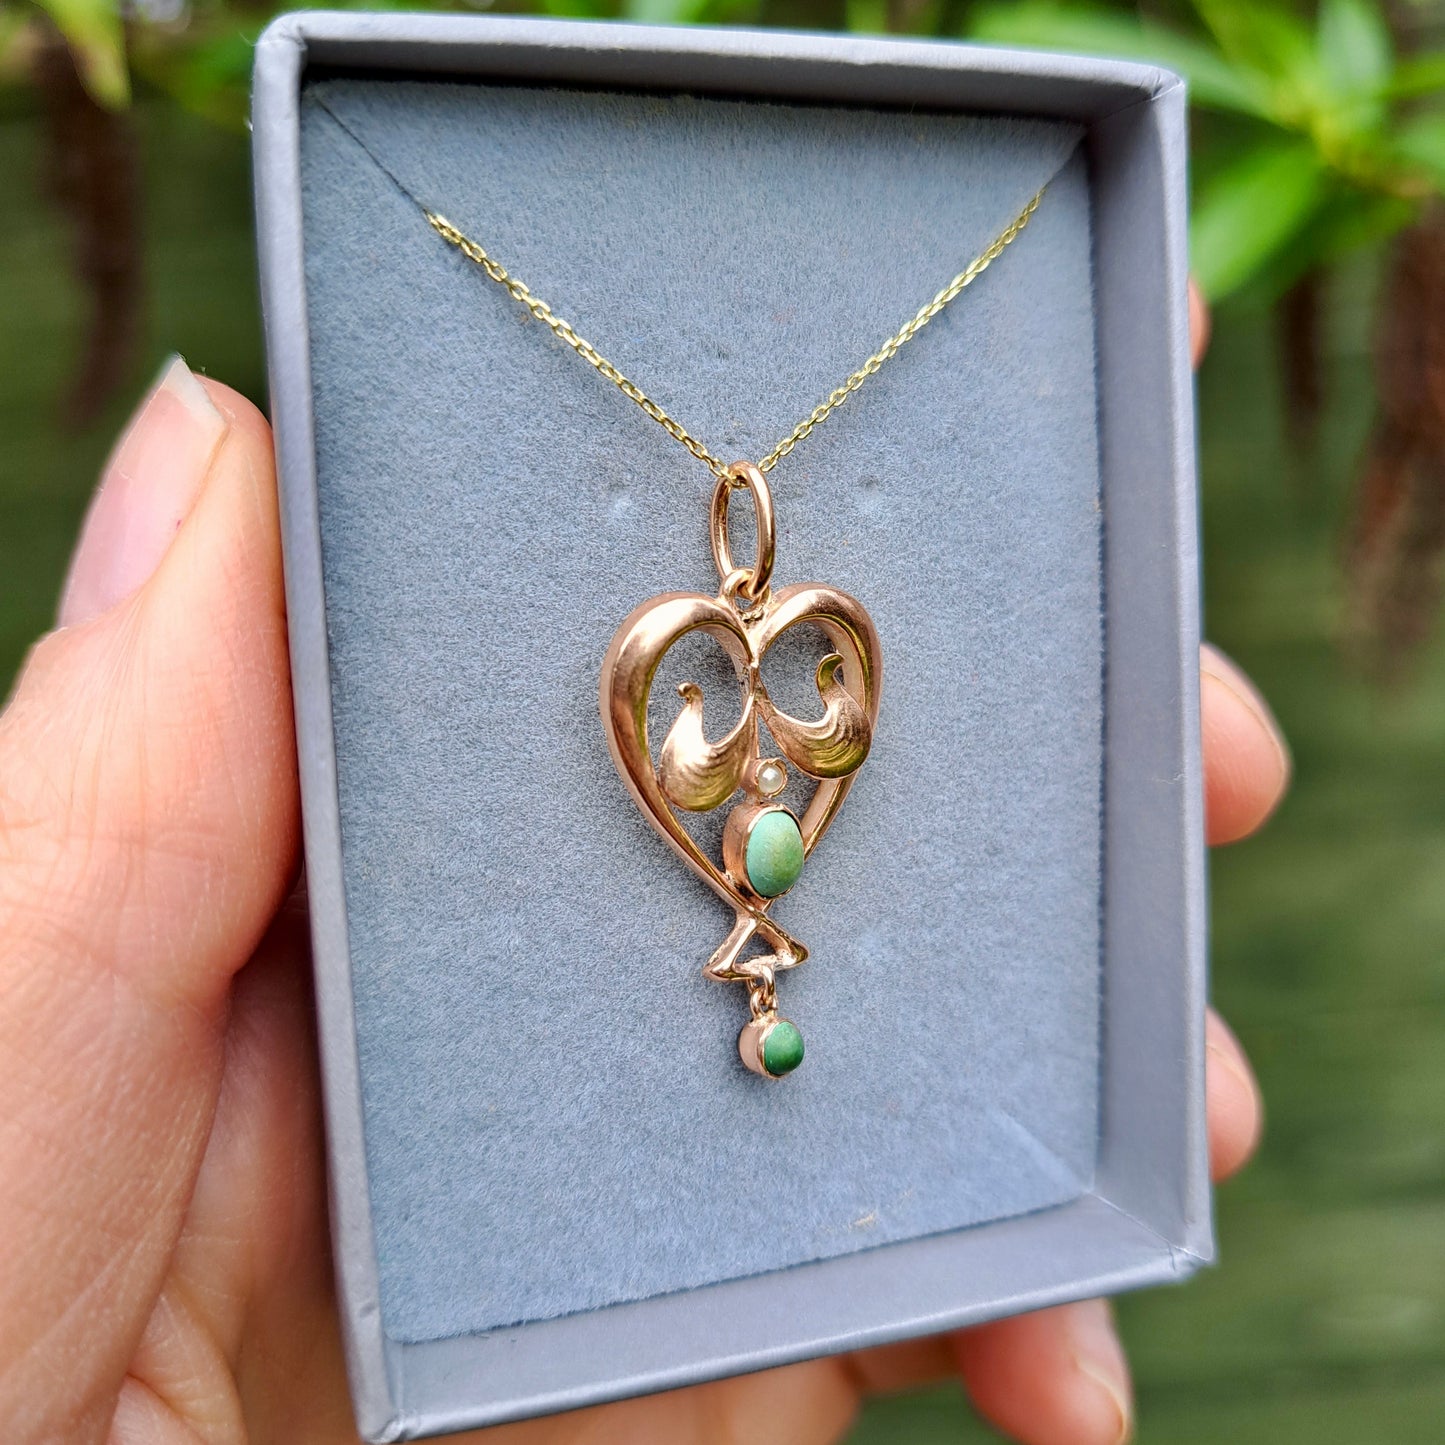 Antique Art Nouveau 9ct Gold, Turquoise and Seed Pearl Heart Pendant